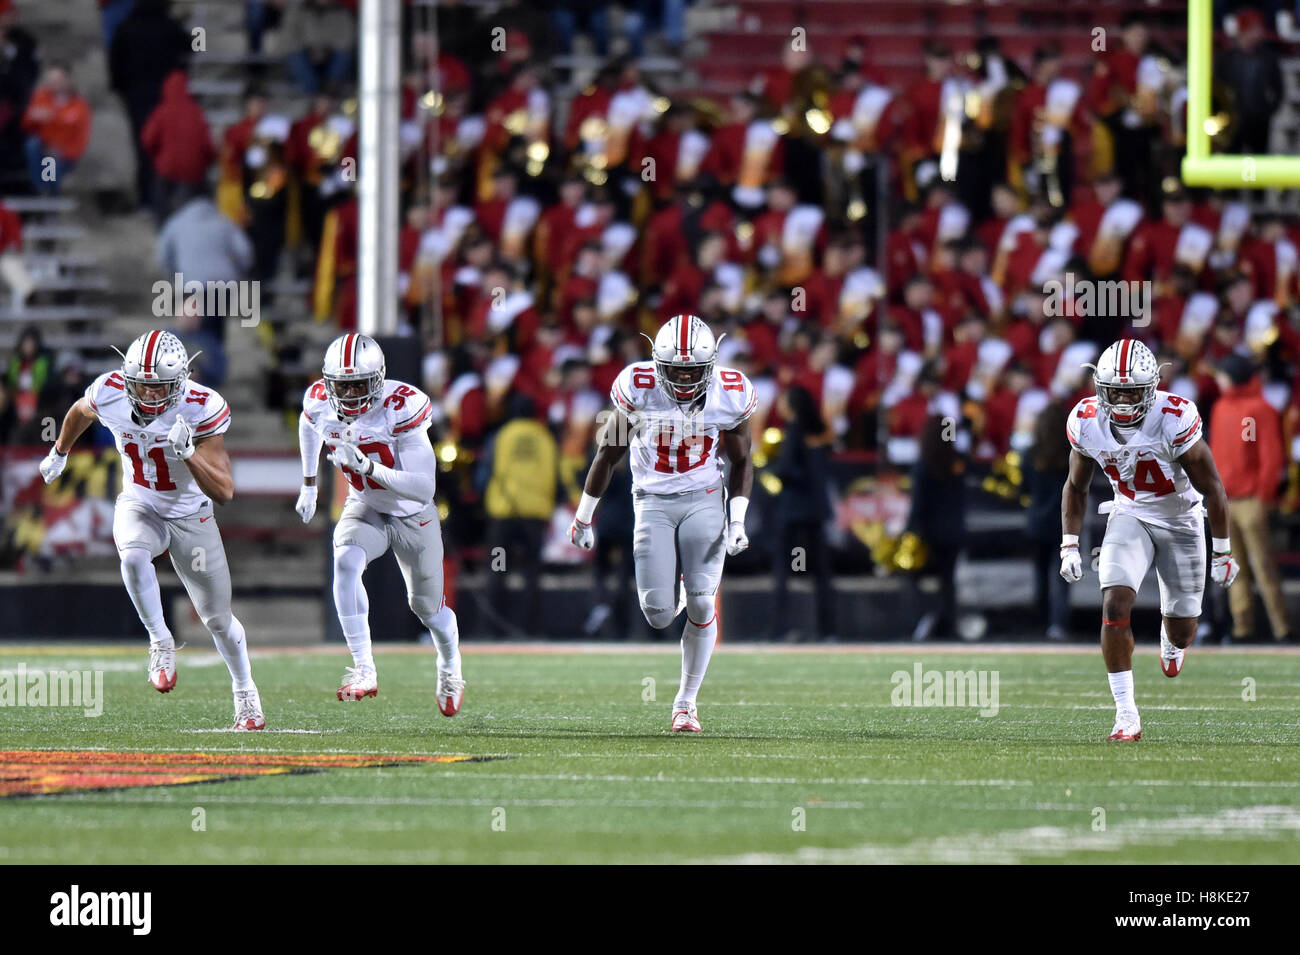 College Park, Maryland, USA. 12th Nov, 2016. The Ohio State Buckeyes kickoff coverage team sprints downfield during a game played at Maryland Stadium at College Park, MD. Ohio State beat Maryland 62-3. © Ken Inness/ZUMA Wire/Alamy Live News Stock Photo